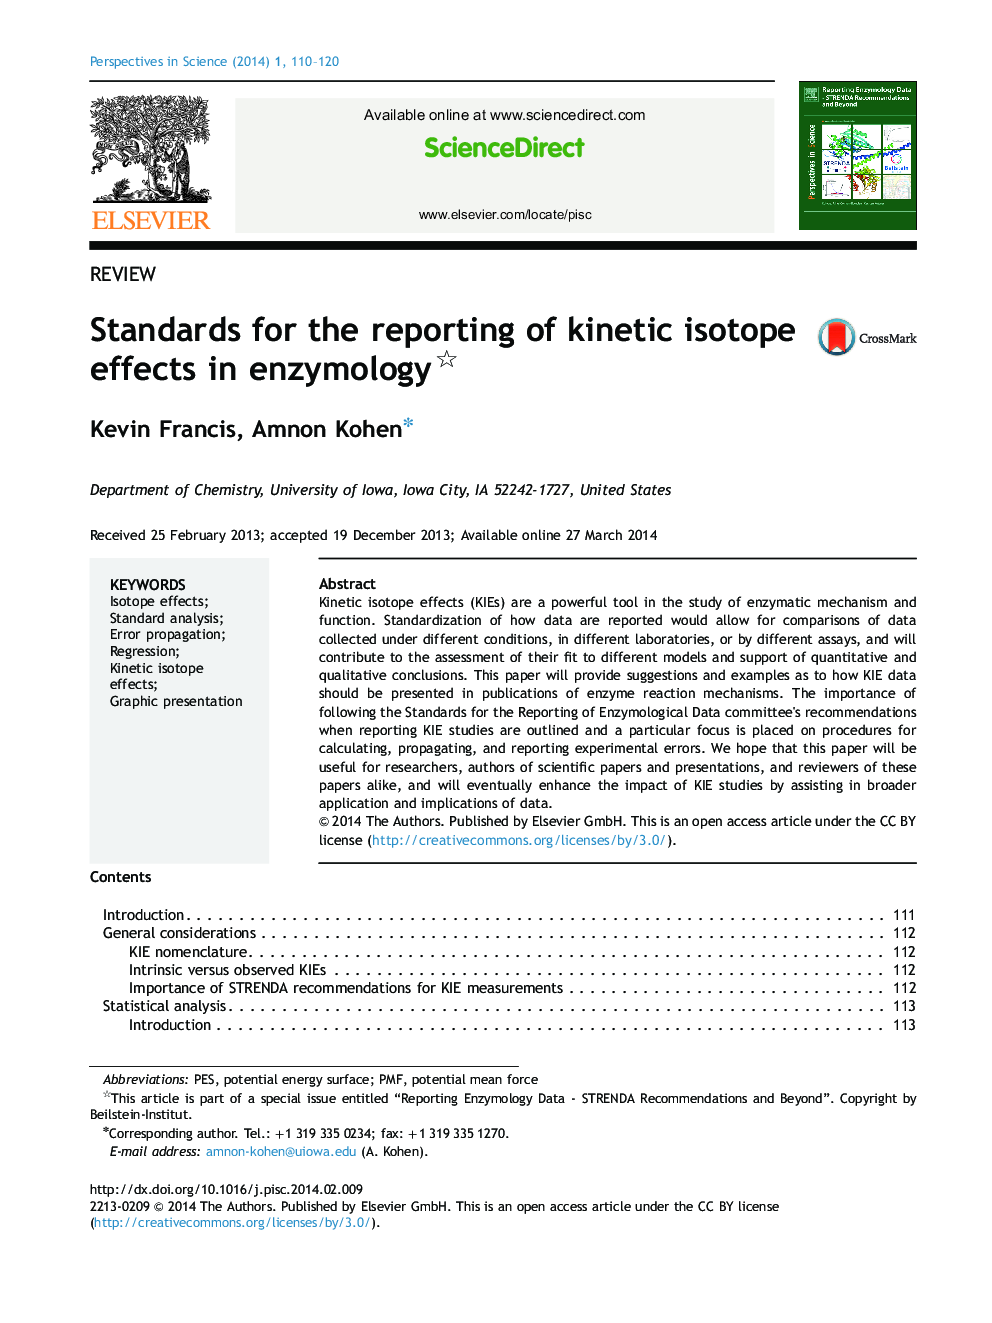 Standards for the reporting of kinetic isotope effects in enzymology 